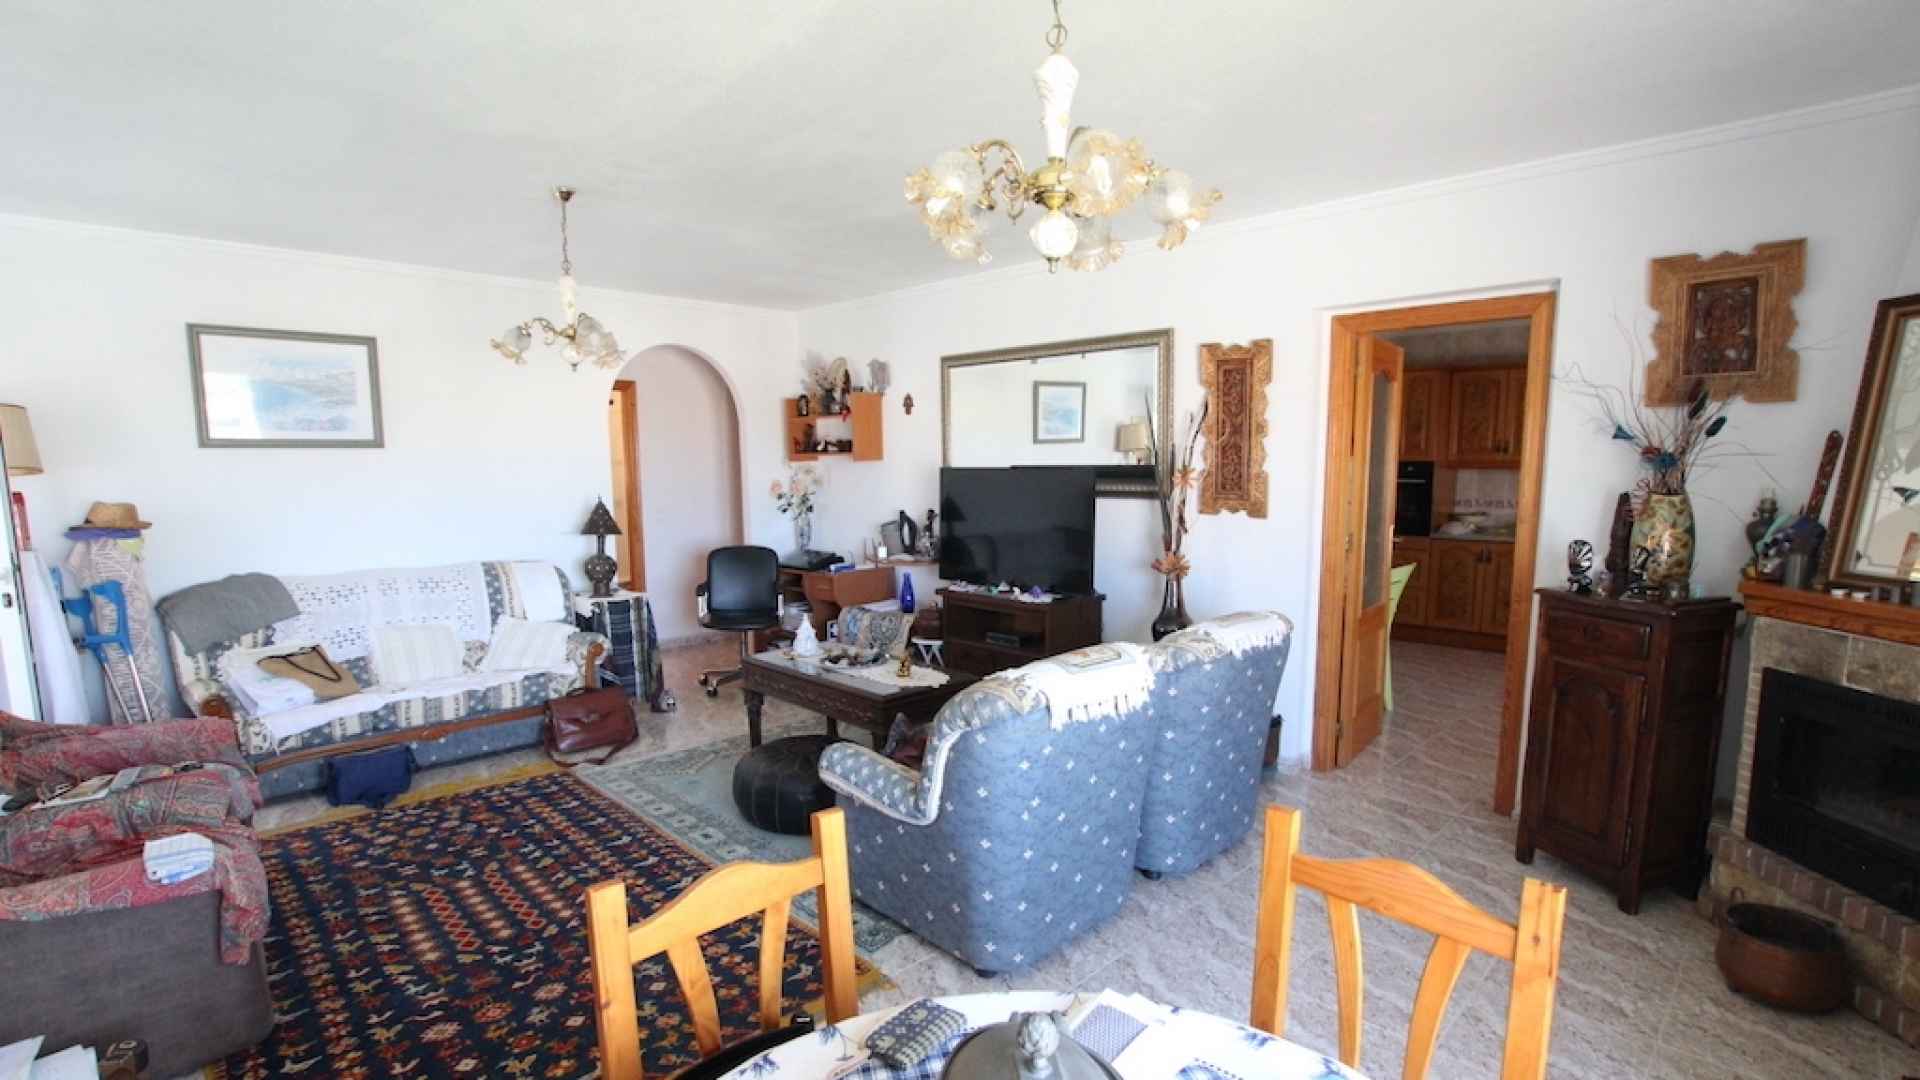 48133_spacious_210sqm_detached_villa_with_internal_garage___private_pool_260623093701_img_5837